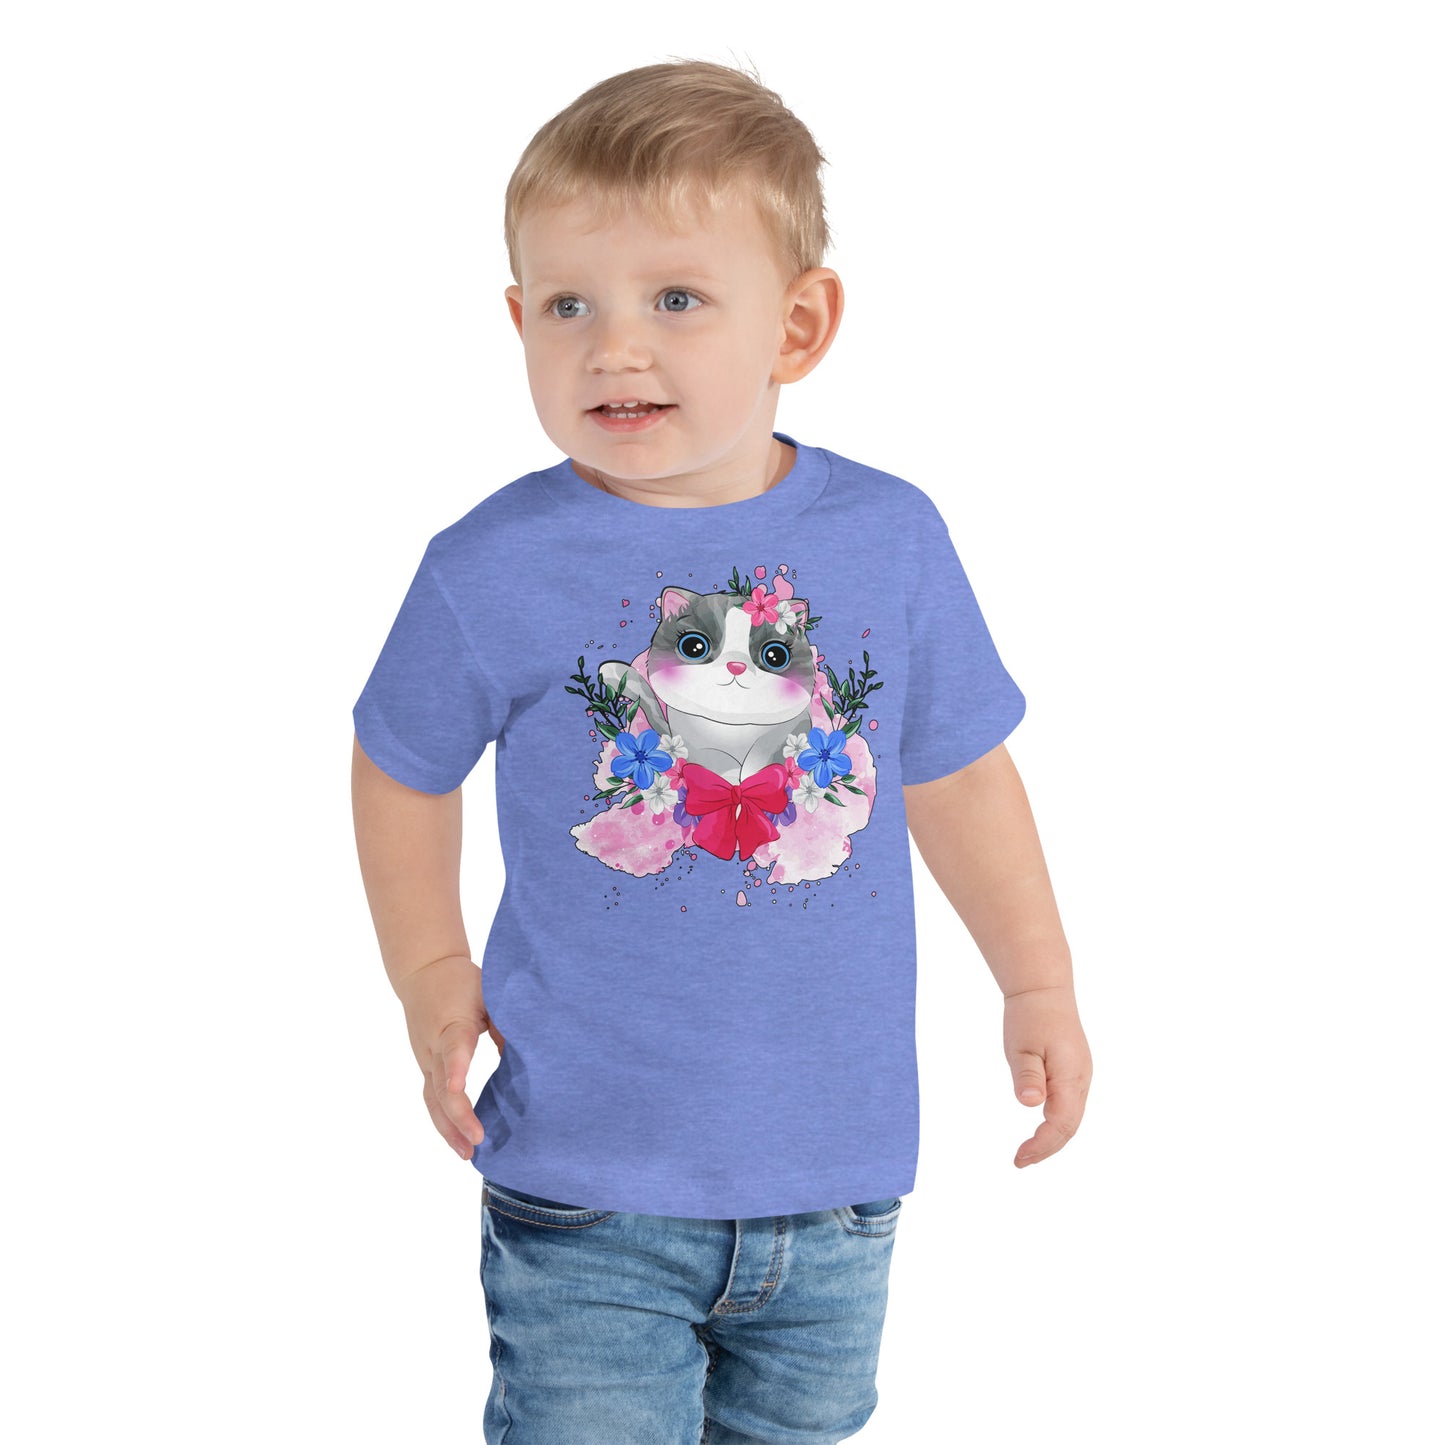 Cute Kitty Cat with Flowers T-shirt, No. 0328